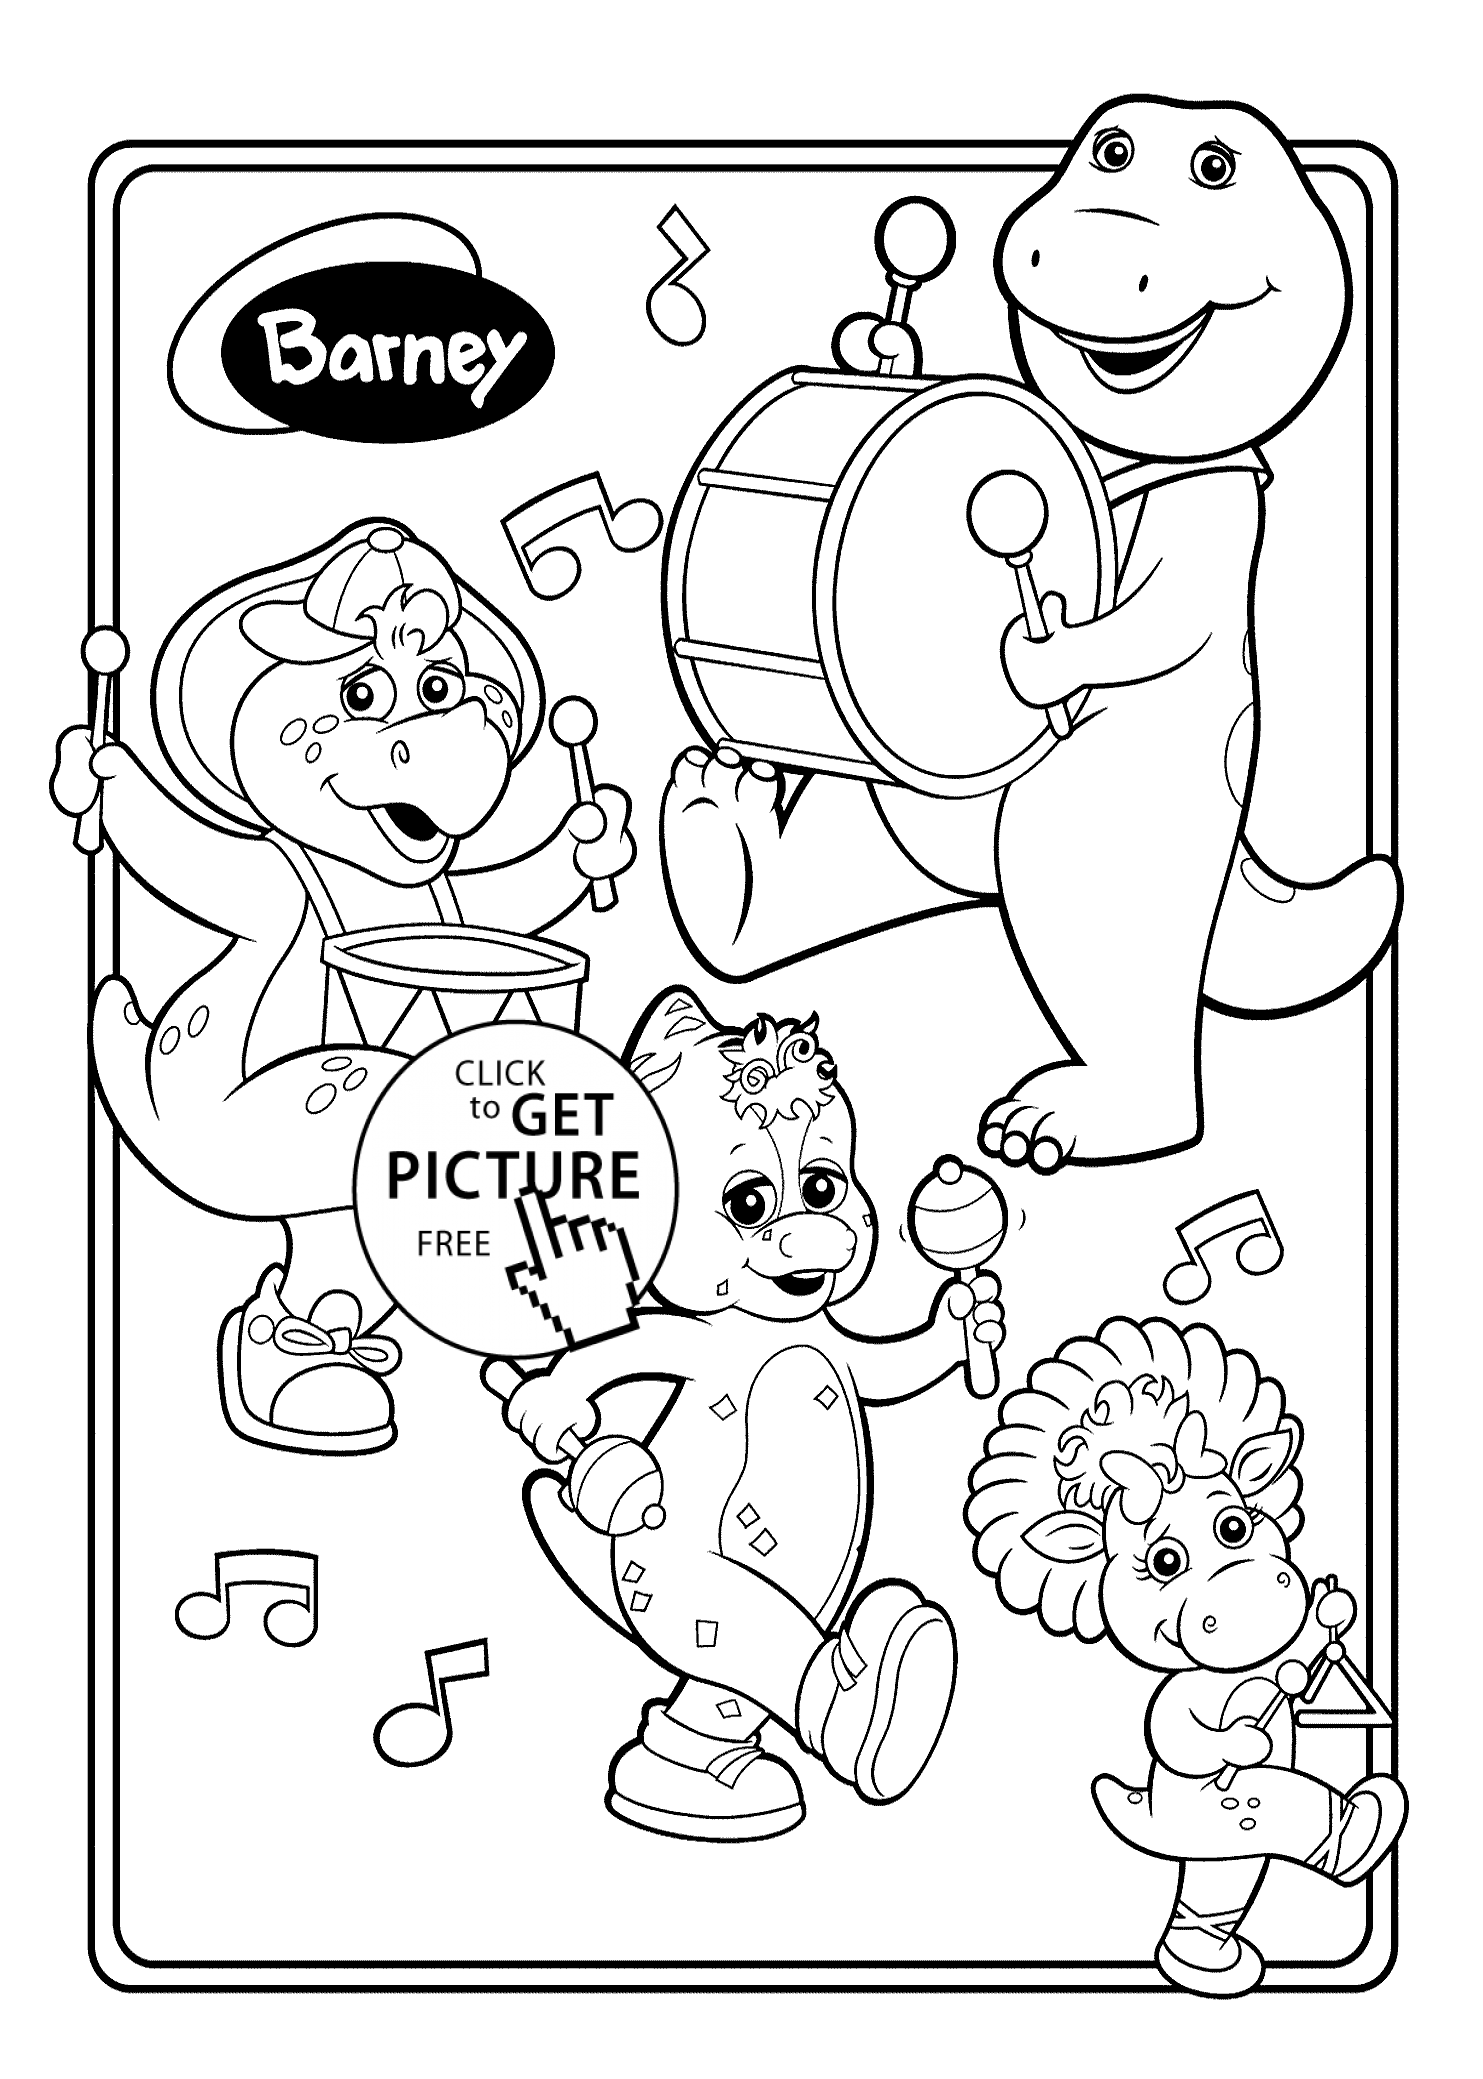 Barney And Friends Musicians Coloring Pages For Kids, Printable